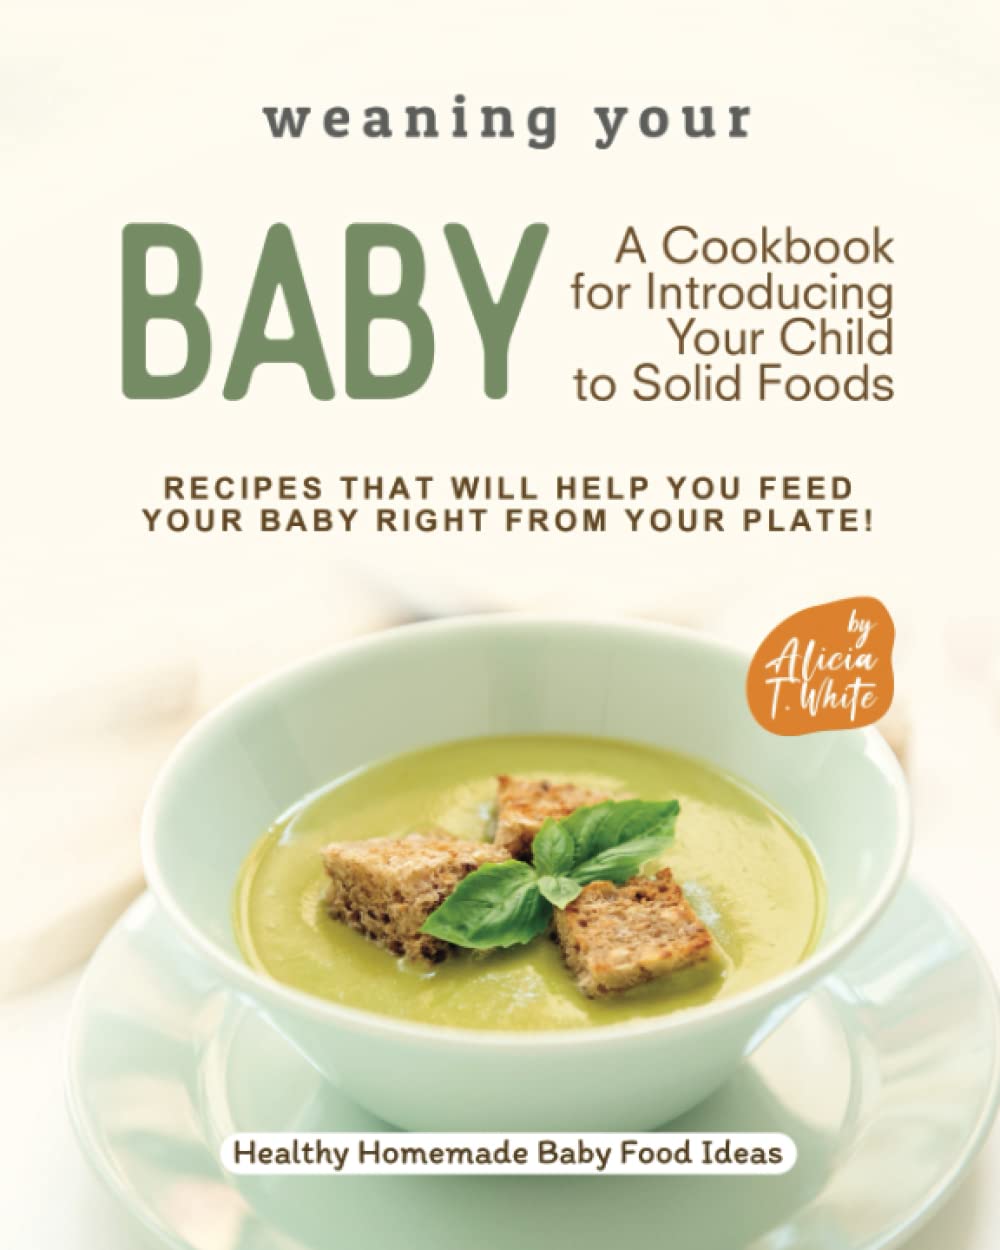 Weaning Your Baby – A Cookbook for Introducing Your Child to Solid Foods: Recipes That Will Help You Feed Your Baby Right from Your Plate! (Healthy Homemade Baby Food Ideas)